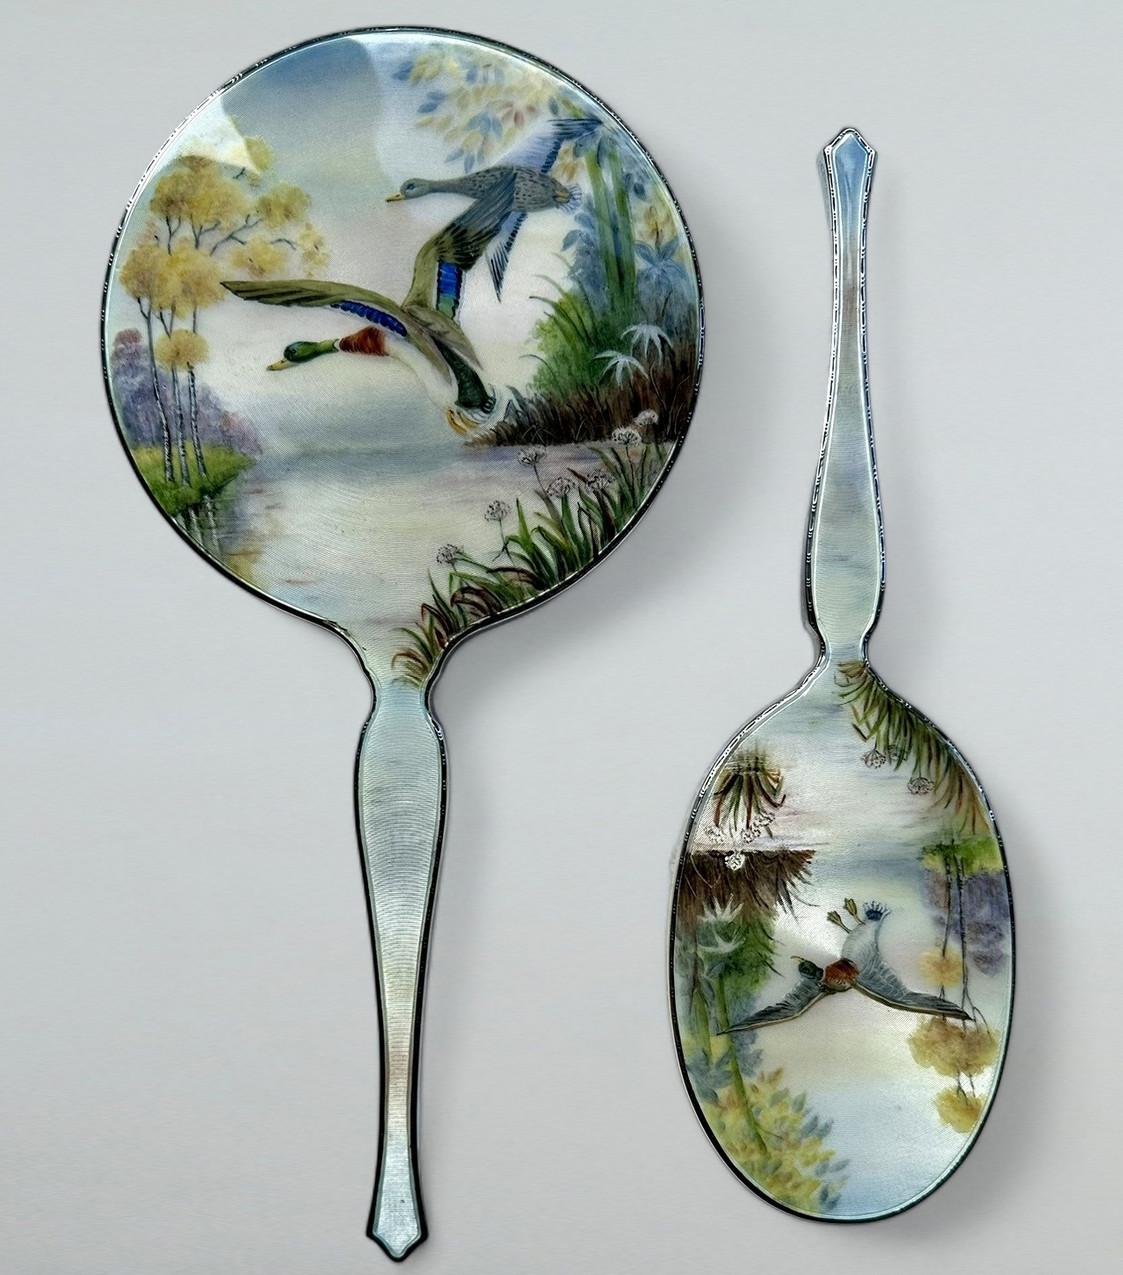 Stylish Mid Century Grand Tour style English sterling silver ladies' vanity dressing table grooming set of outstanding quality, with superb hand painted enamel detail, depicting exotic flying Mallard Birds in landscape over a lake 

Collection